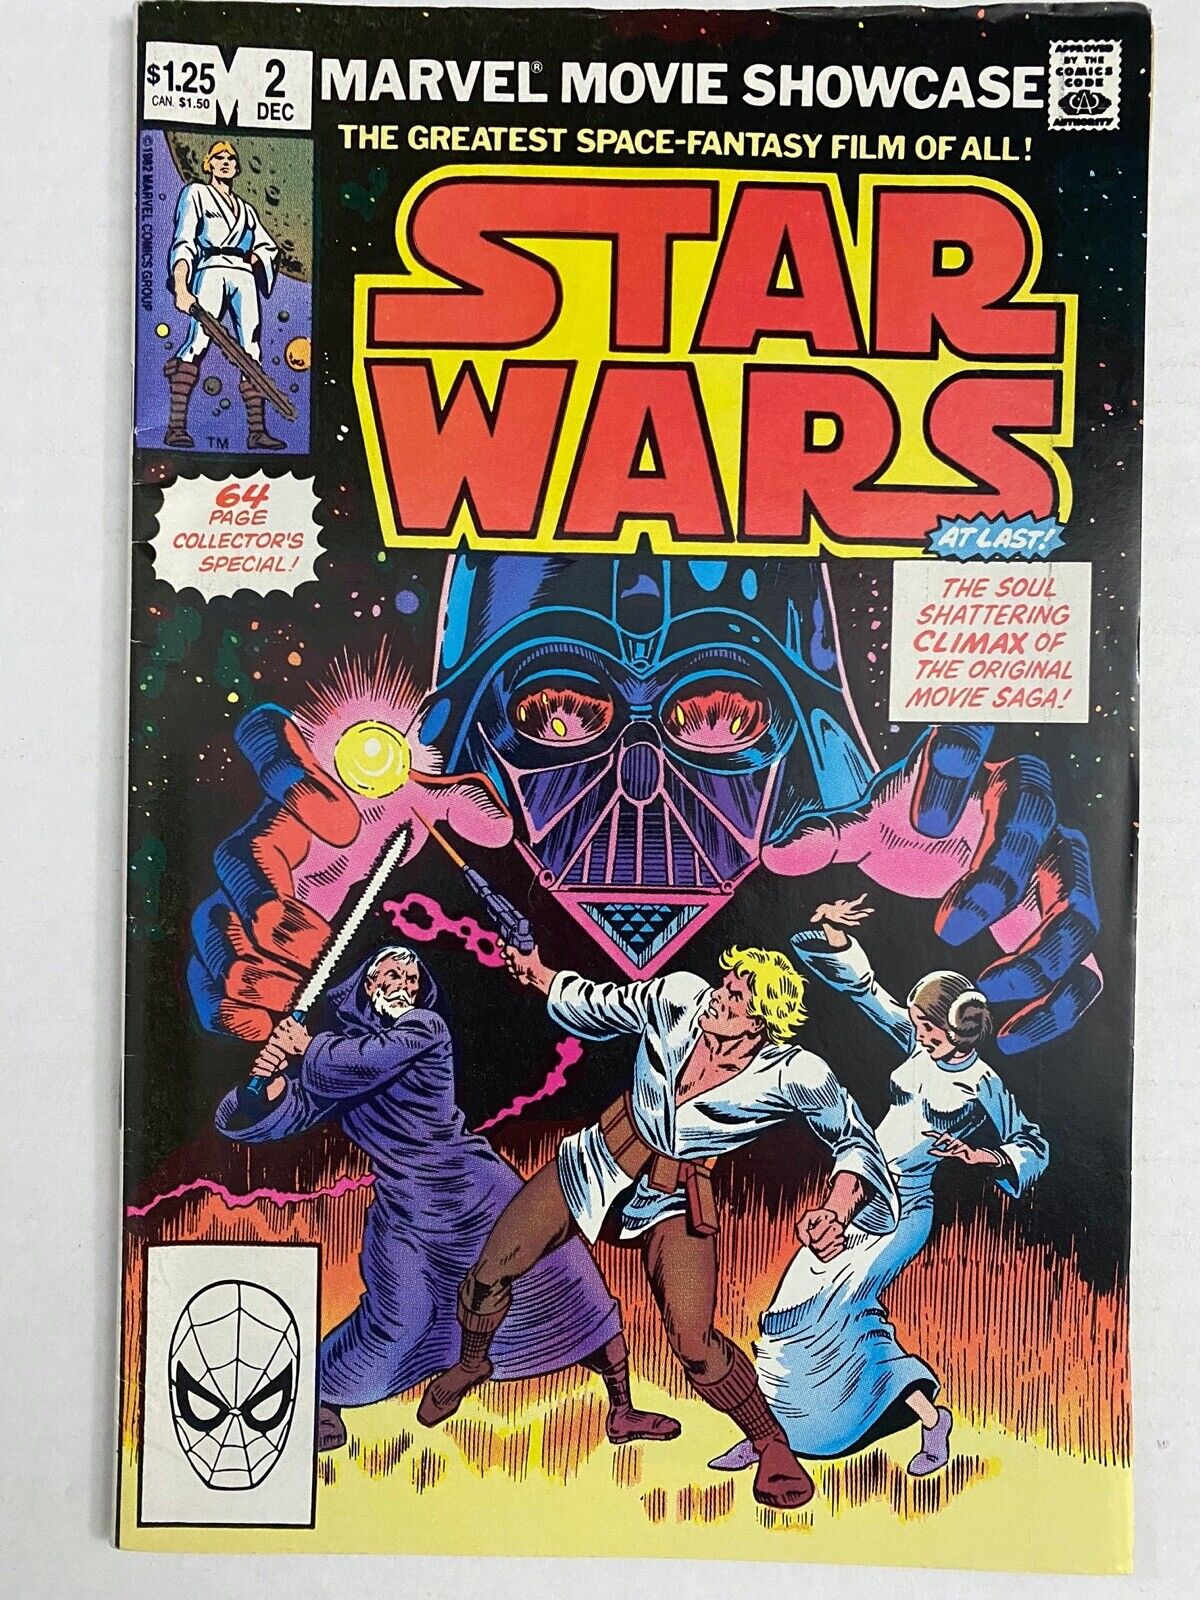 STAR WARS #2 (MARVEL MOVIE SHOWCASE) In Battle with Vader 1982 NM MARVEL COMICS